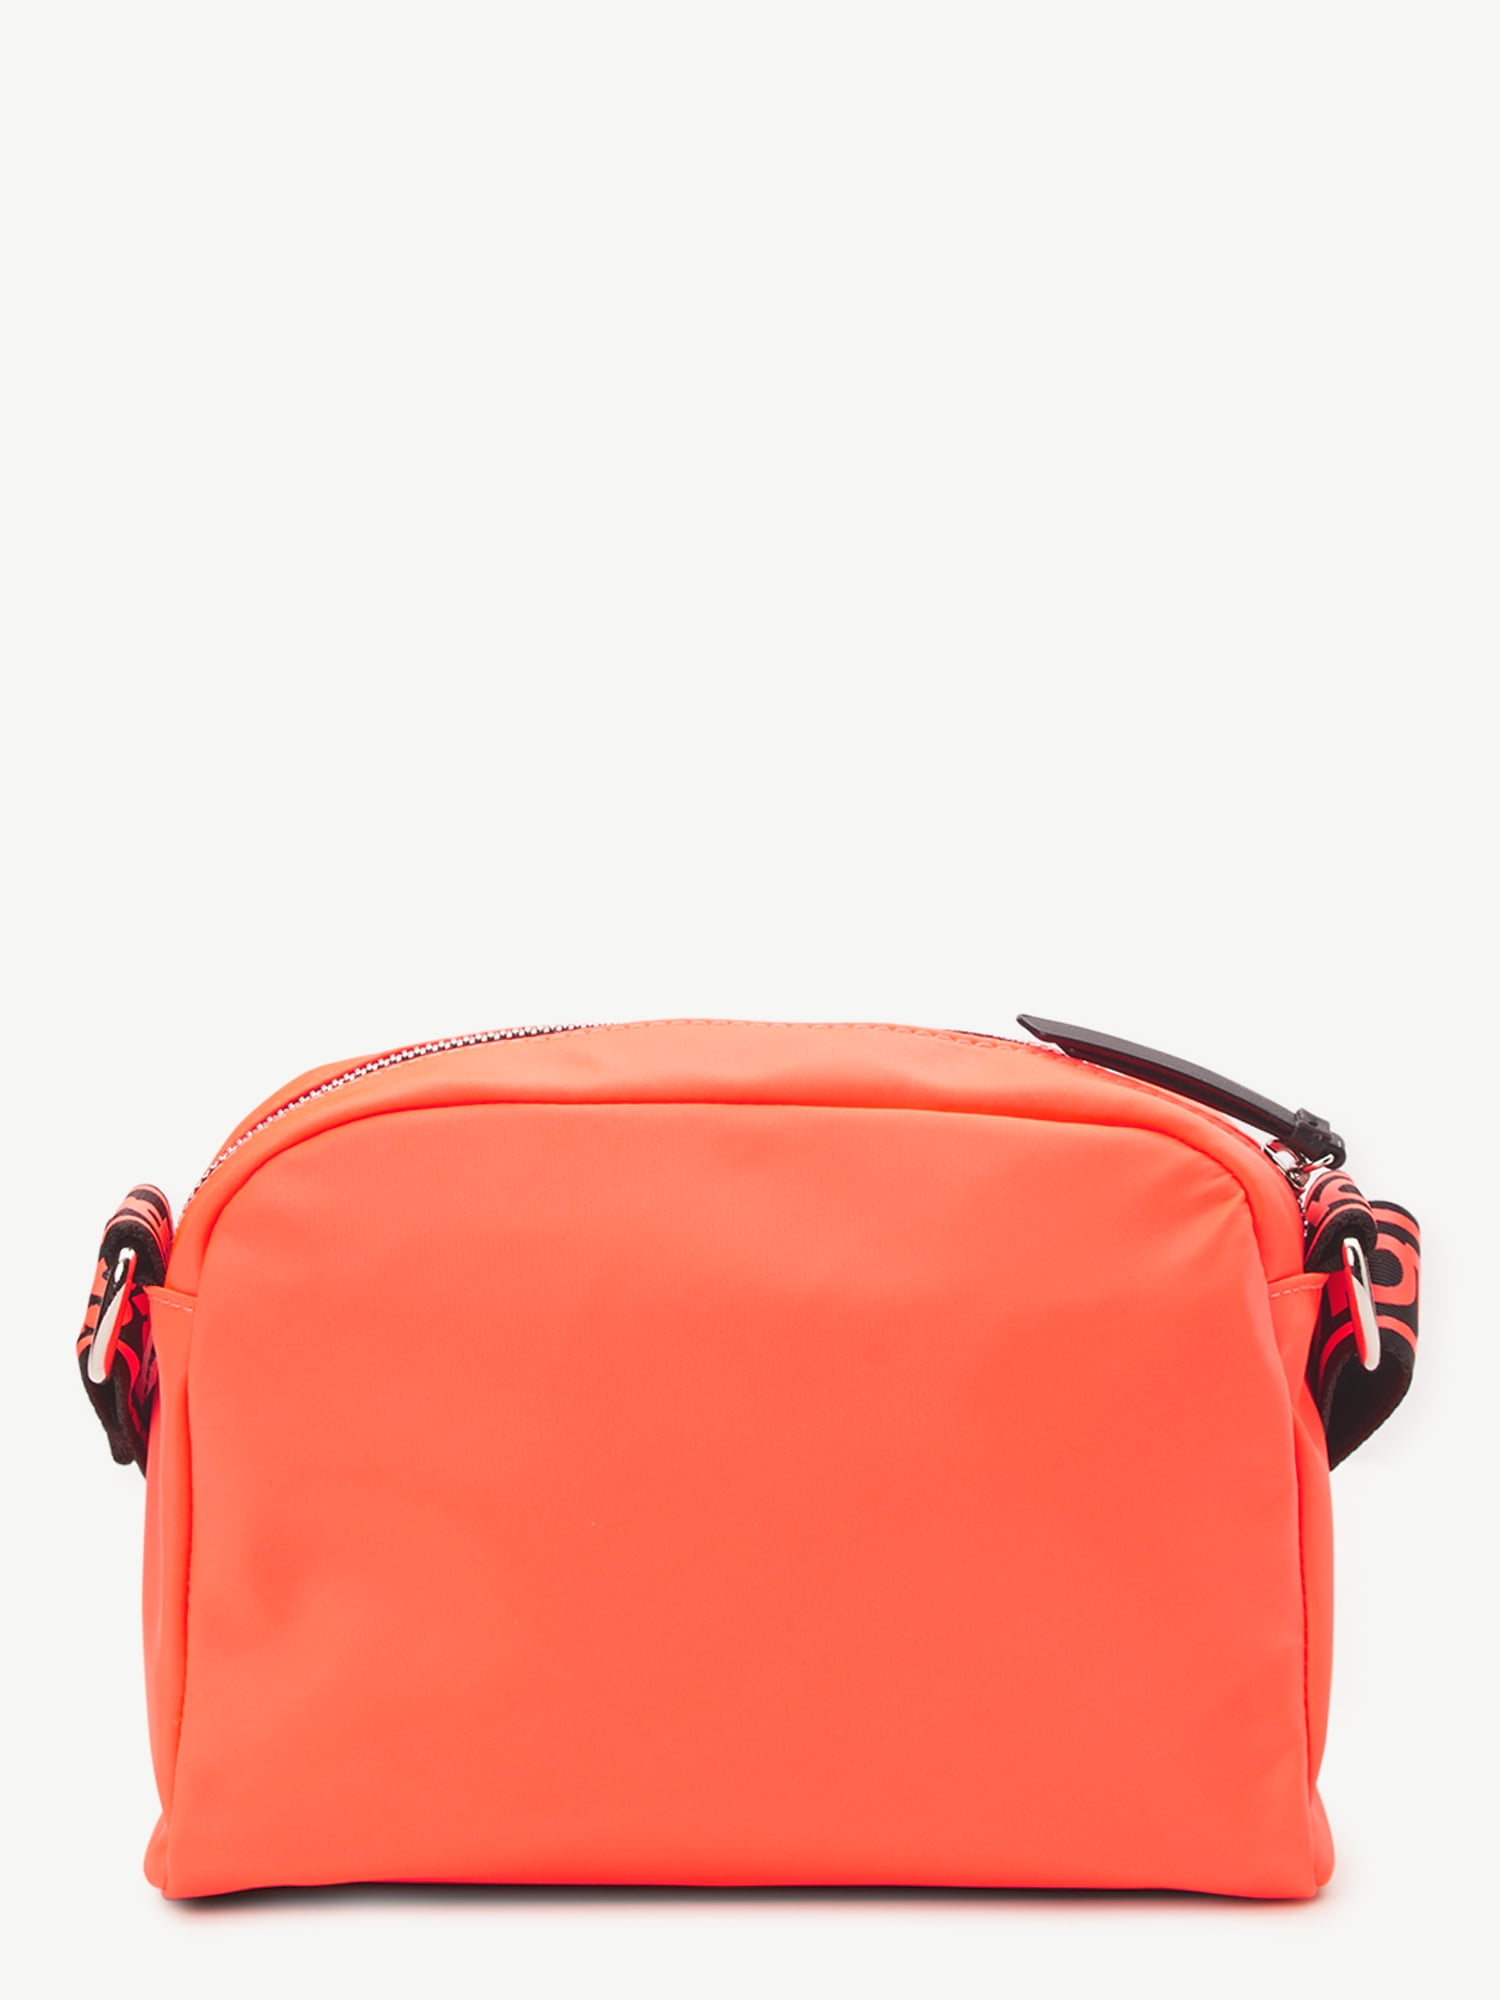 Mini Neon Orange Quilted Square Bag With Coin Purse | SHEIN ASIA